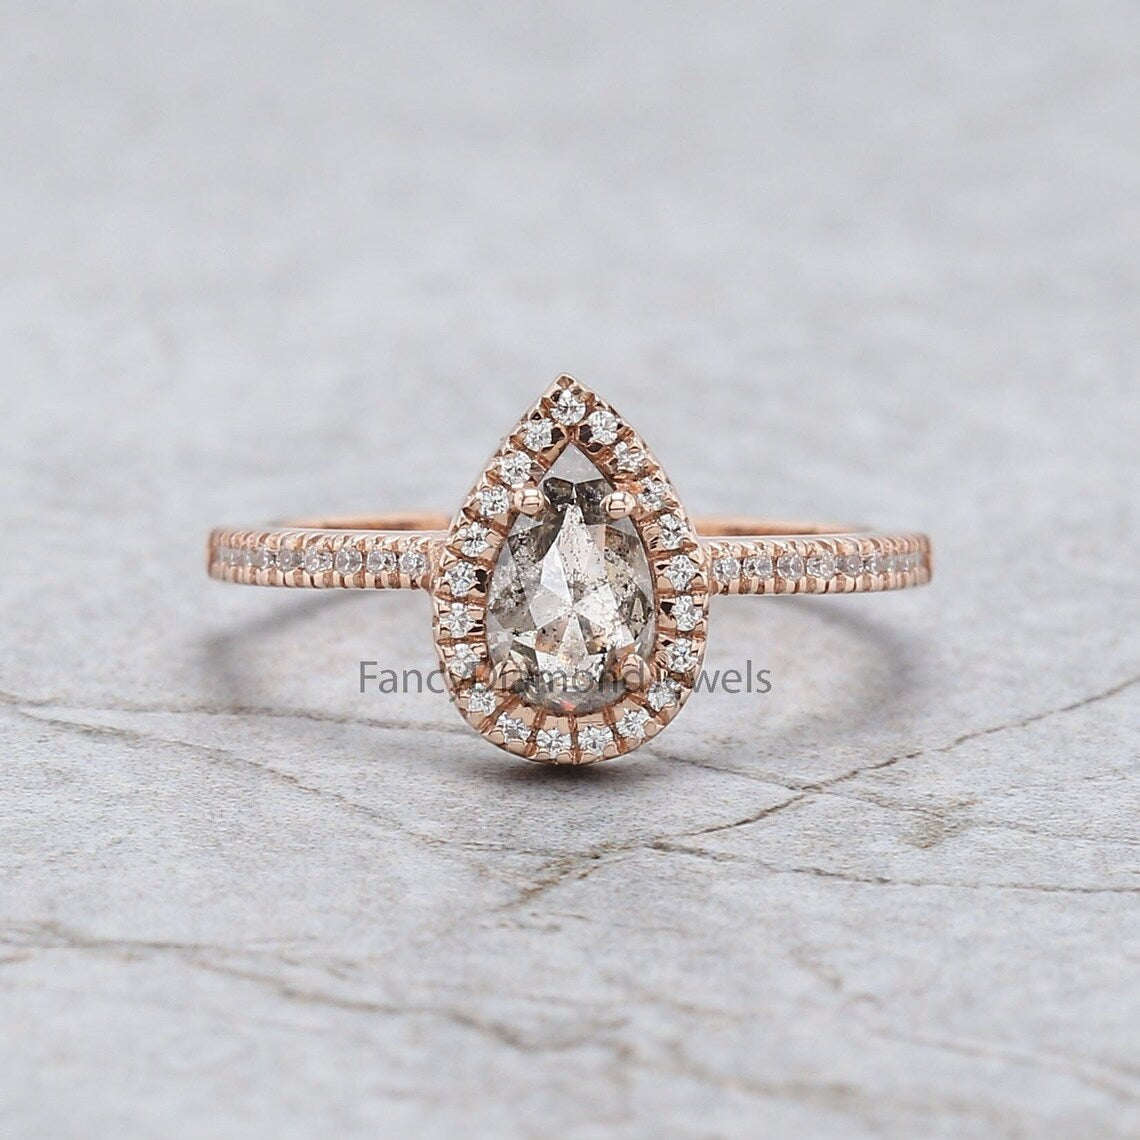 Pear Cut Salt And Pepper Diamond Ring 0.58 Ct 6.95 MM Pear Diamond Ring 14K Solid Rose Gold Silver Pear Engagement Ring Gift For Her QN589